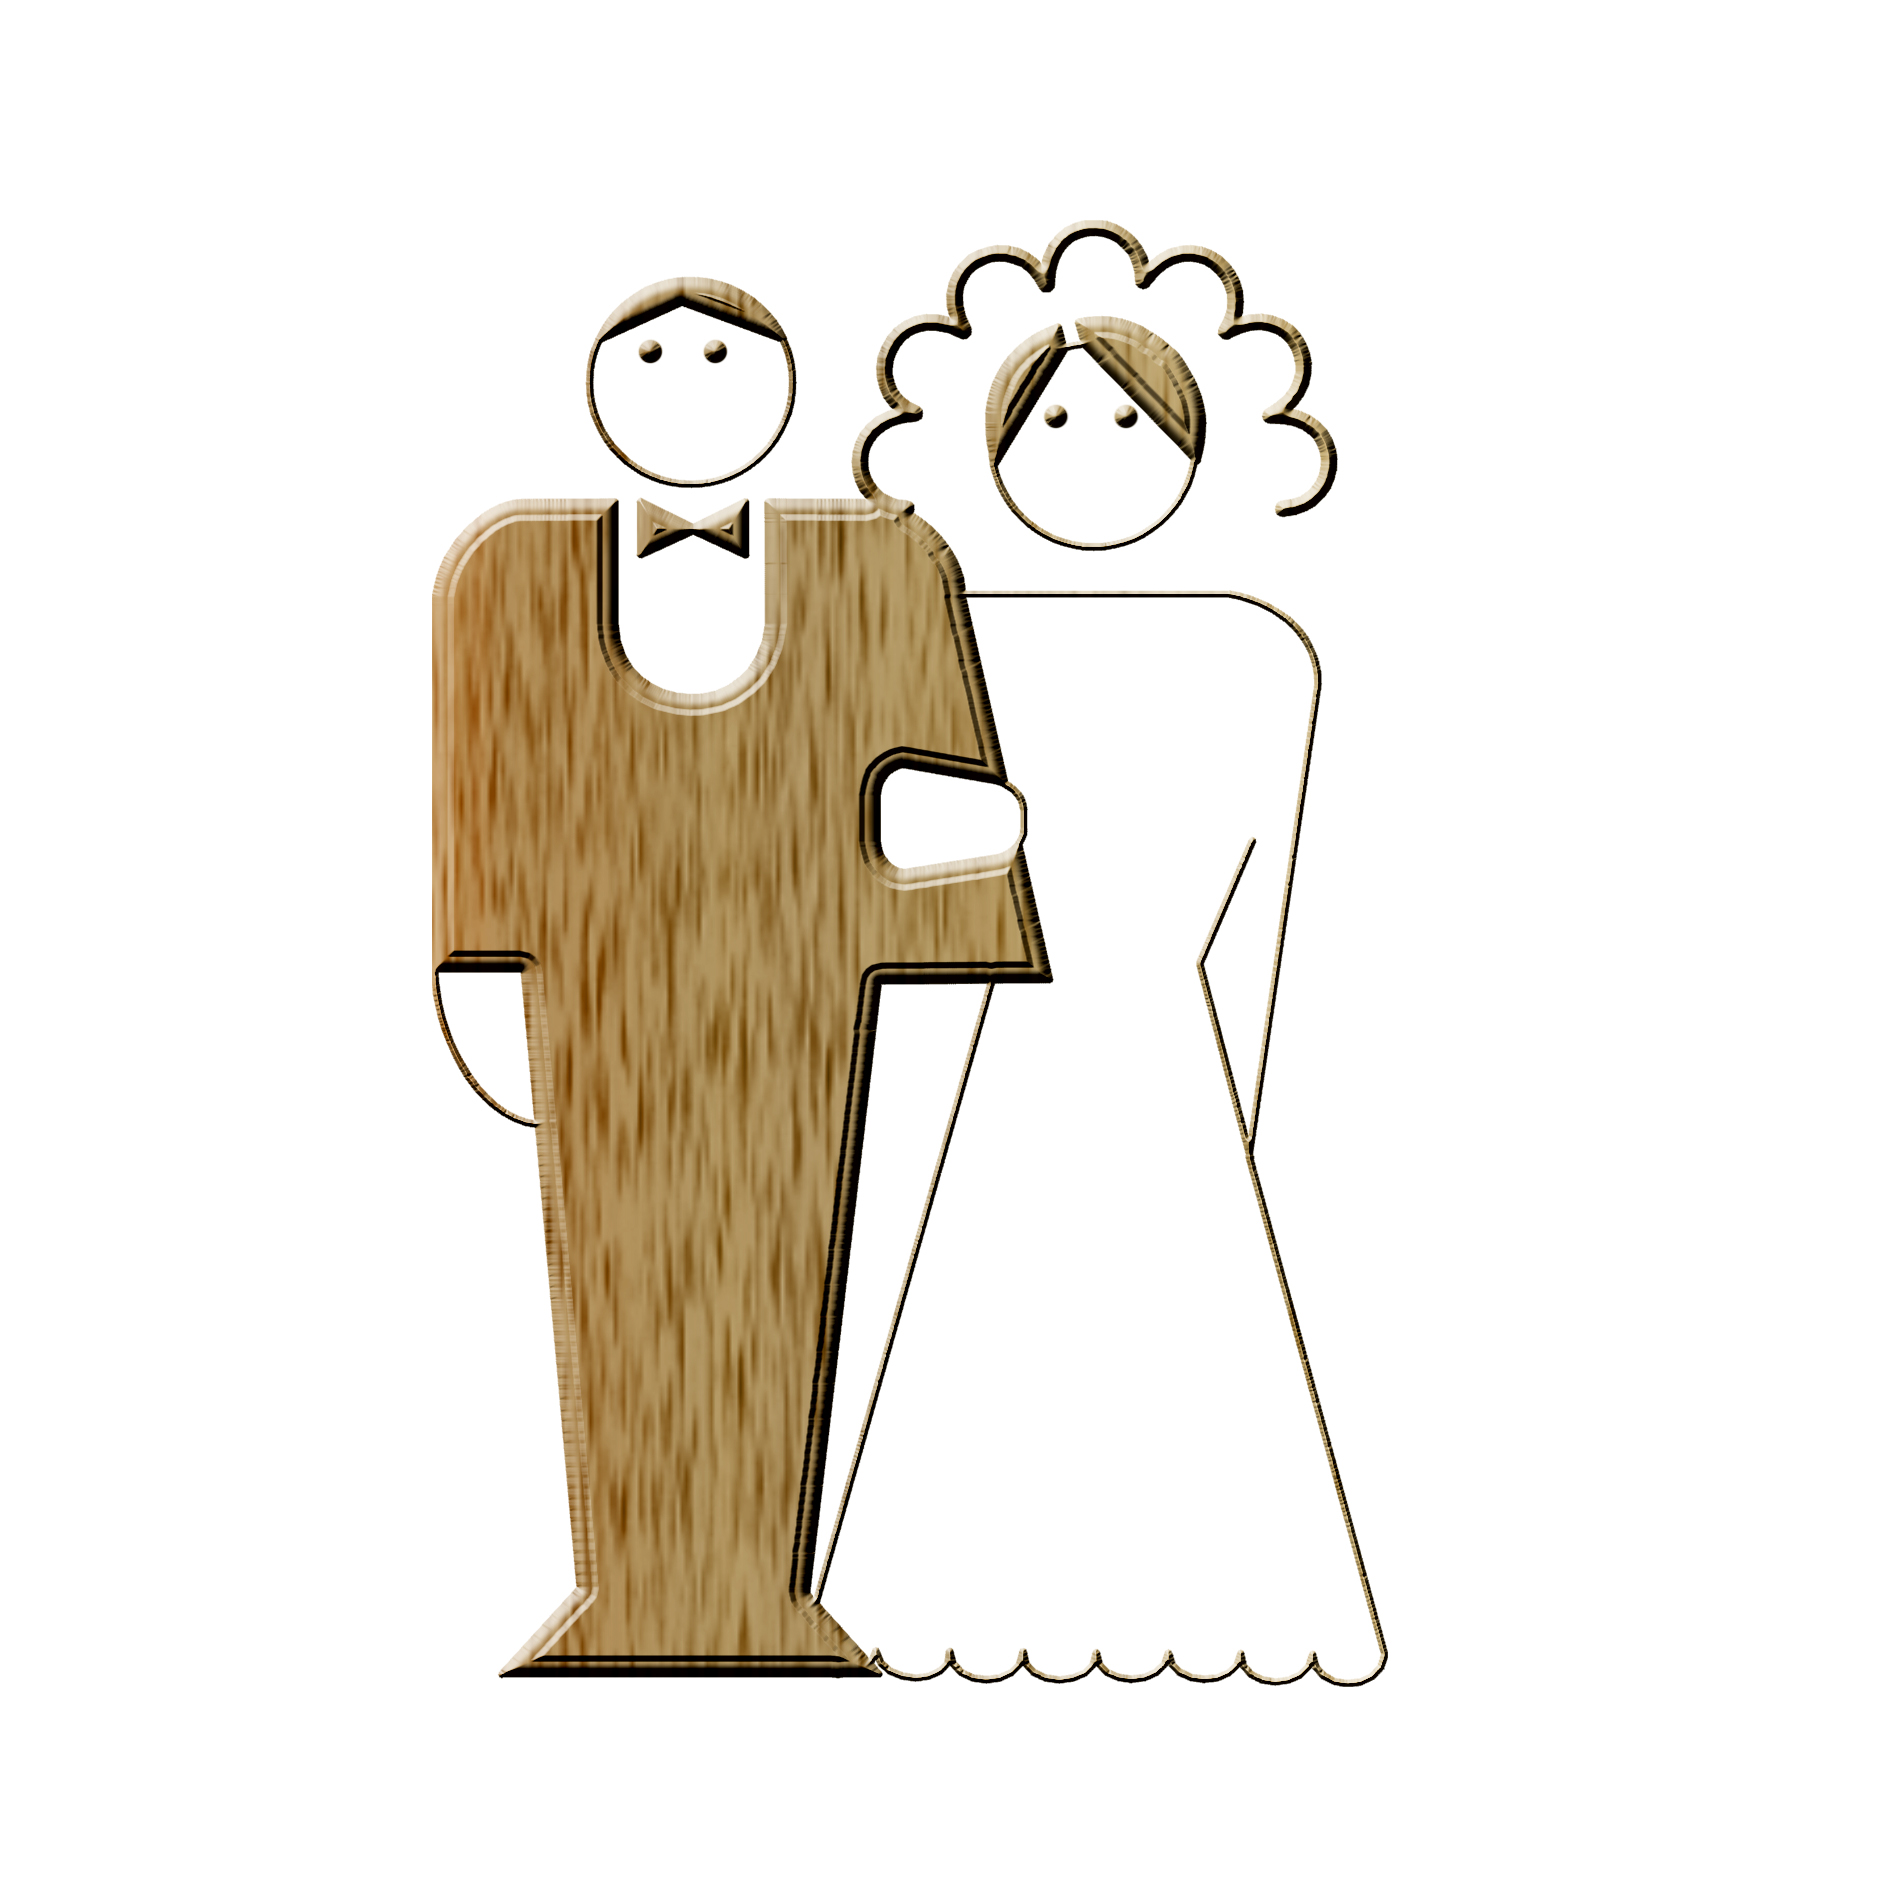 Marriage couple clipart